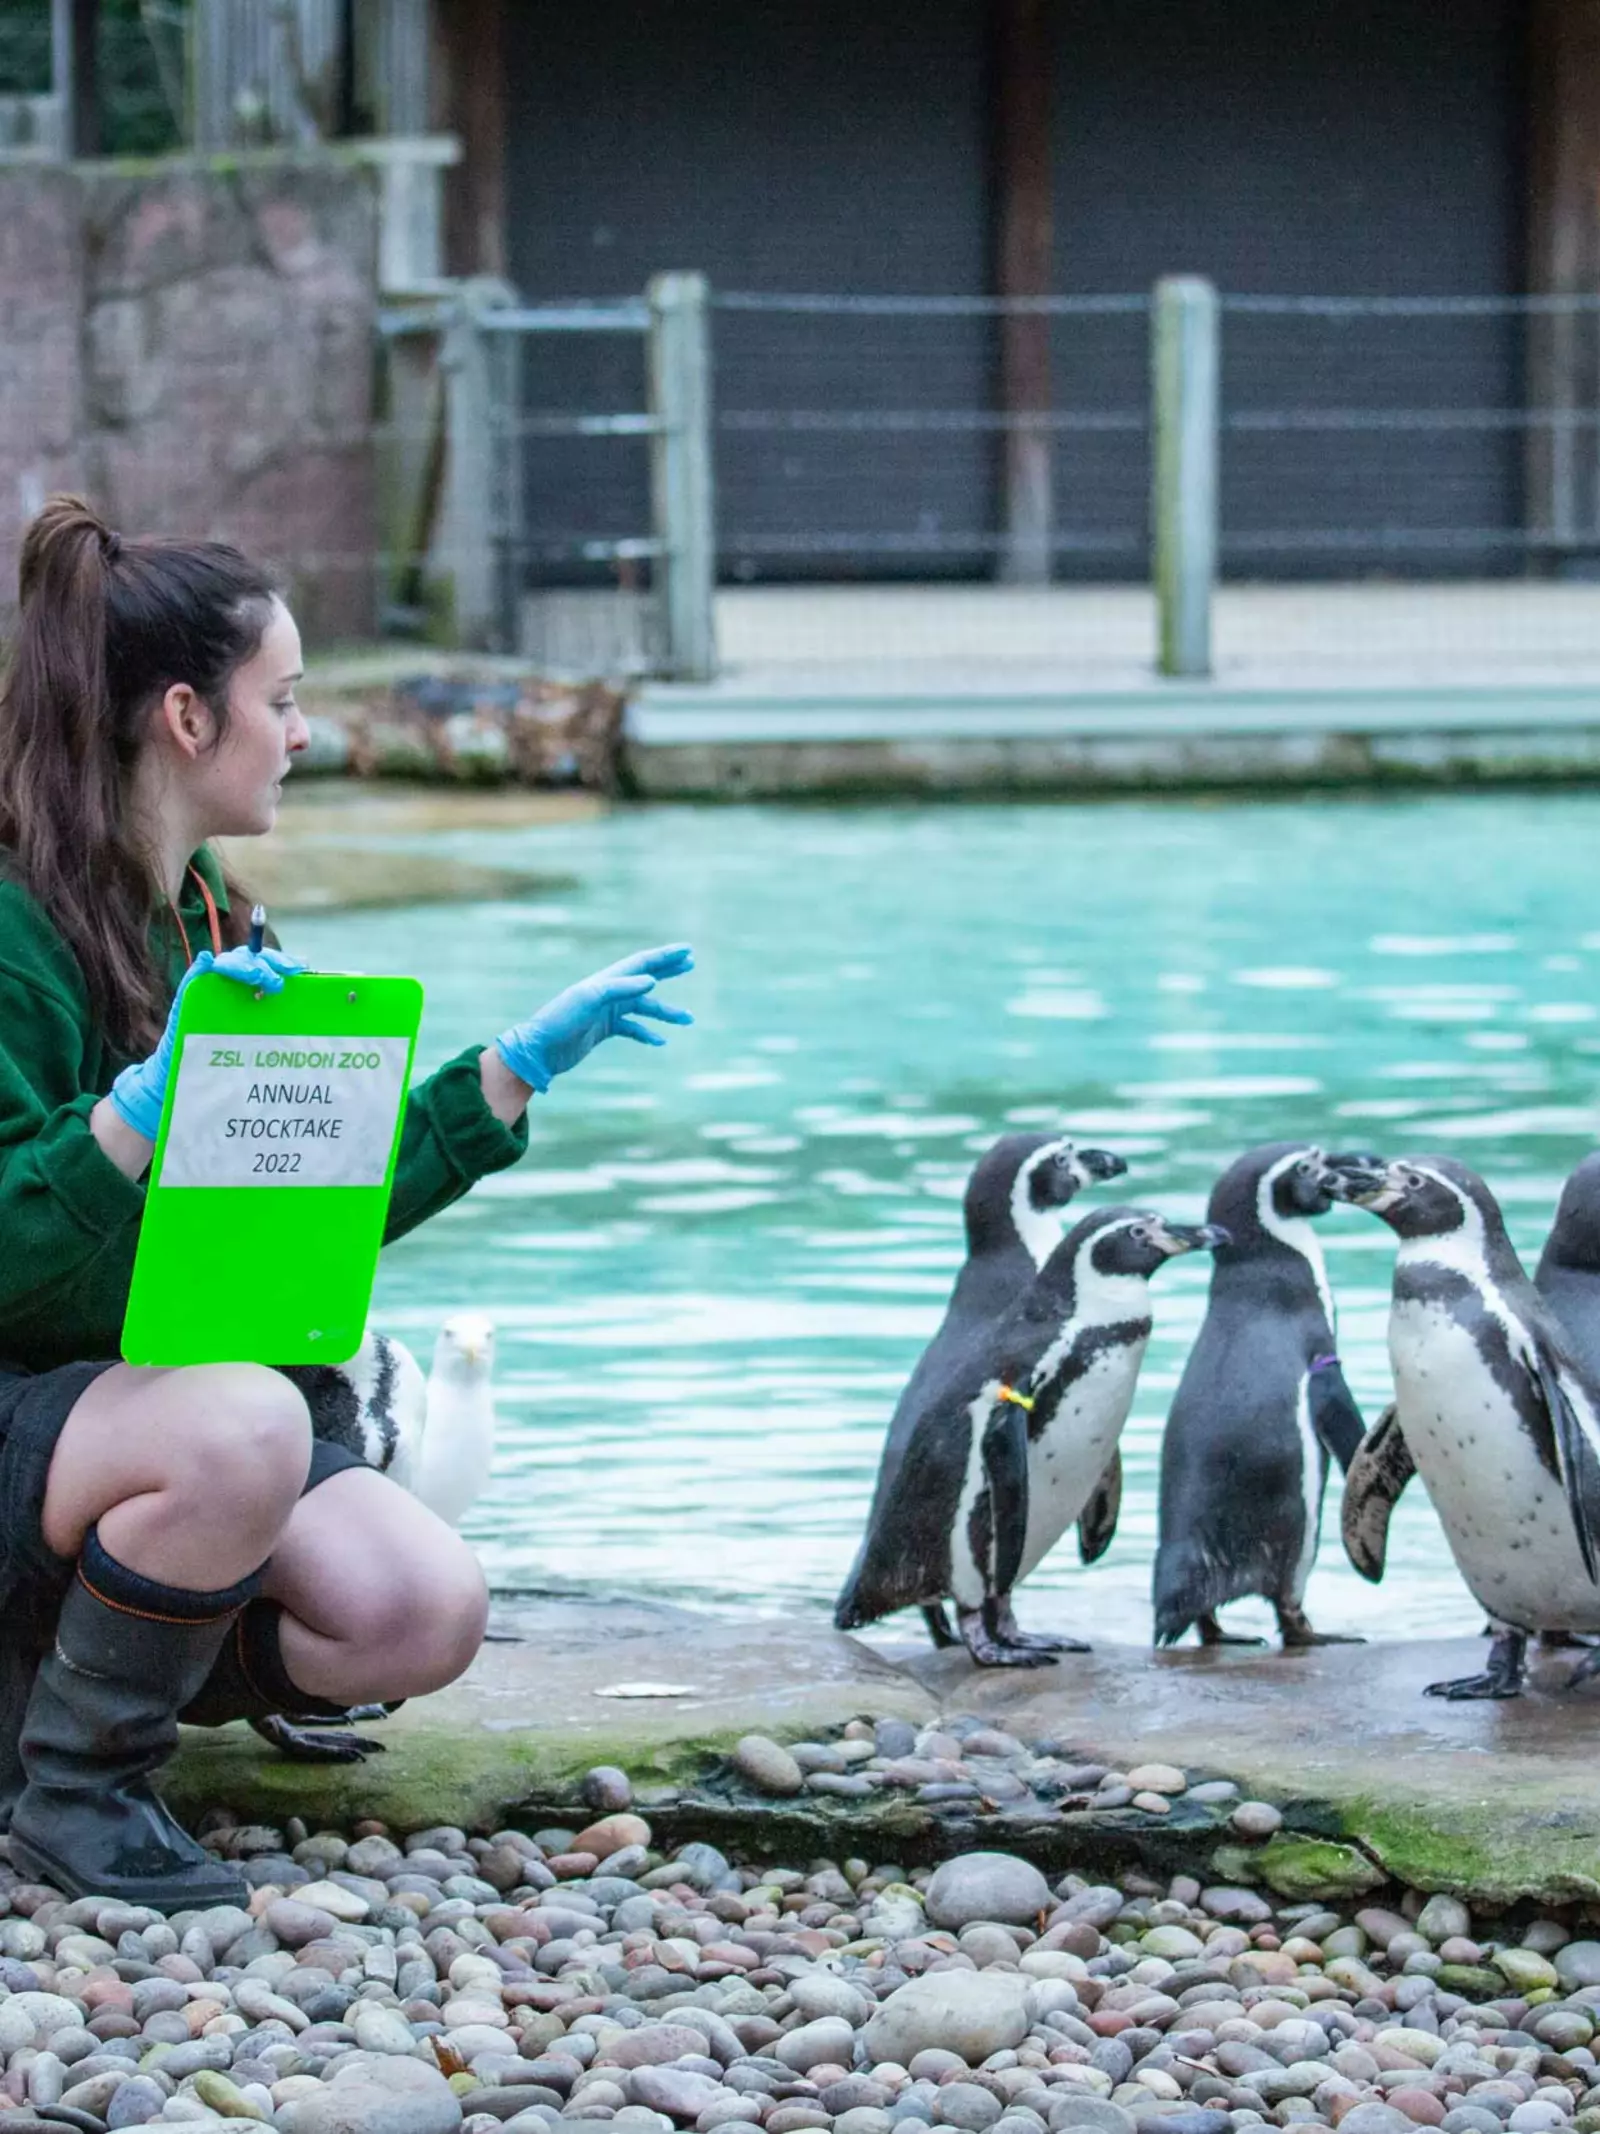 Keeper Hattie Sire counts the Humboldt penguins at the Annual Stocktake 2022